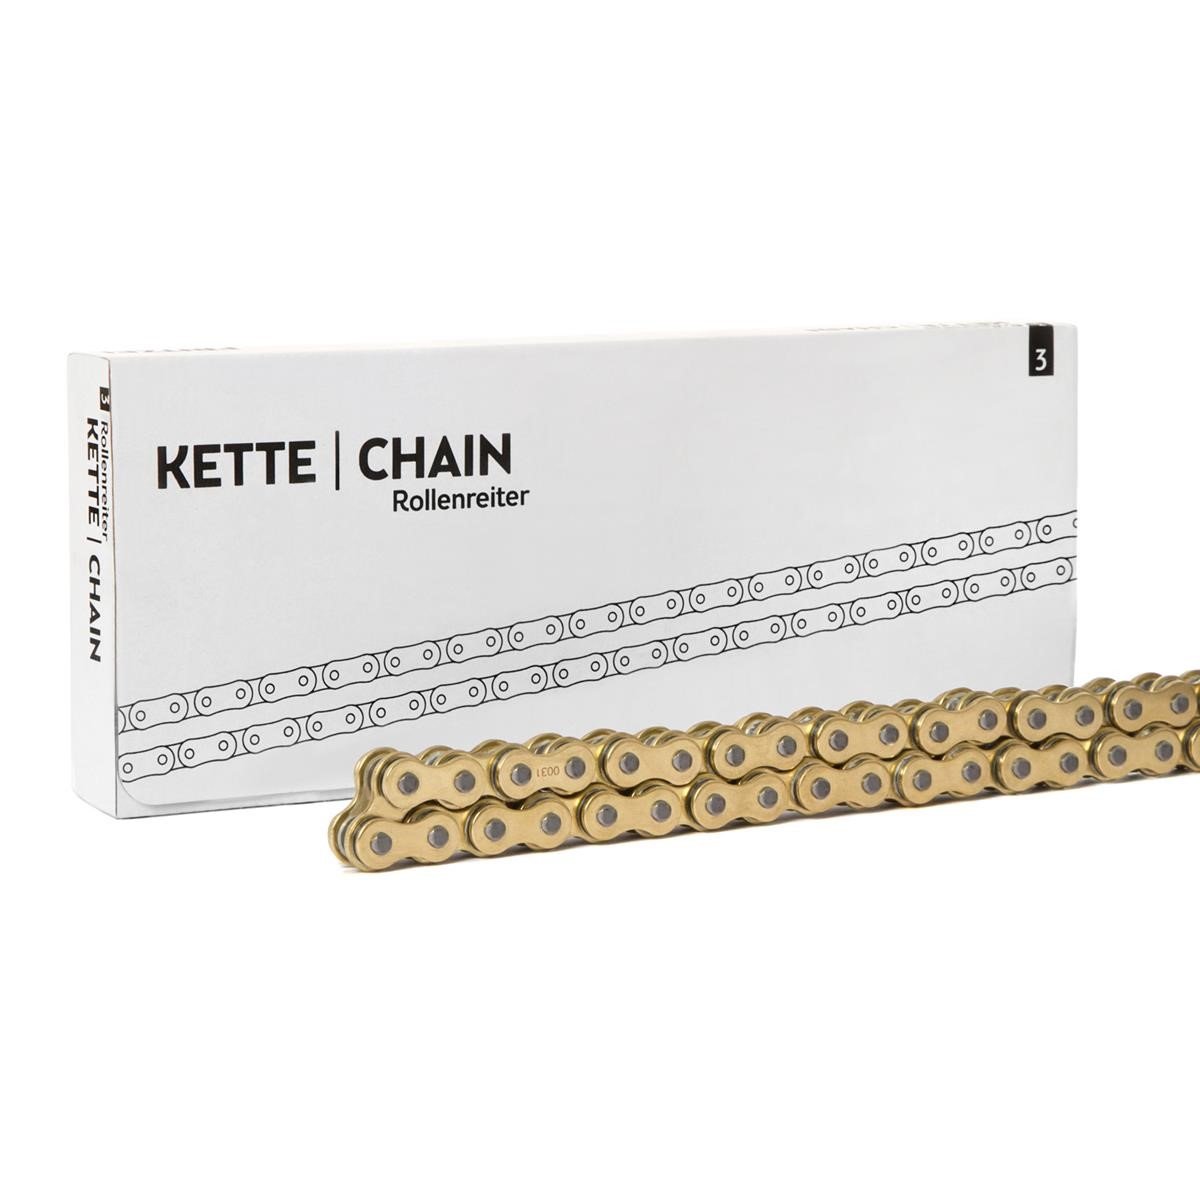 FRITZEL Chain Rollenreiter 520 Pitch, Reinforced, X-Ring, Gold